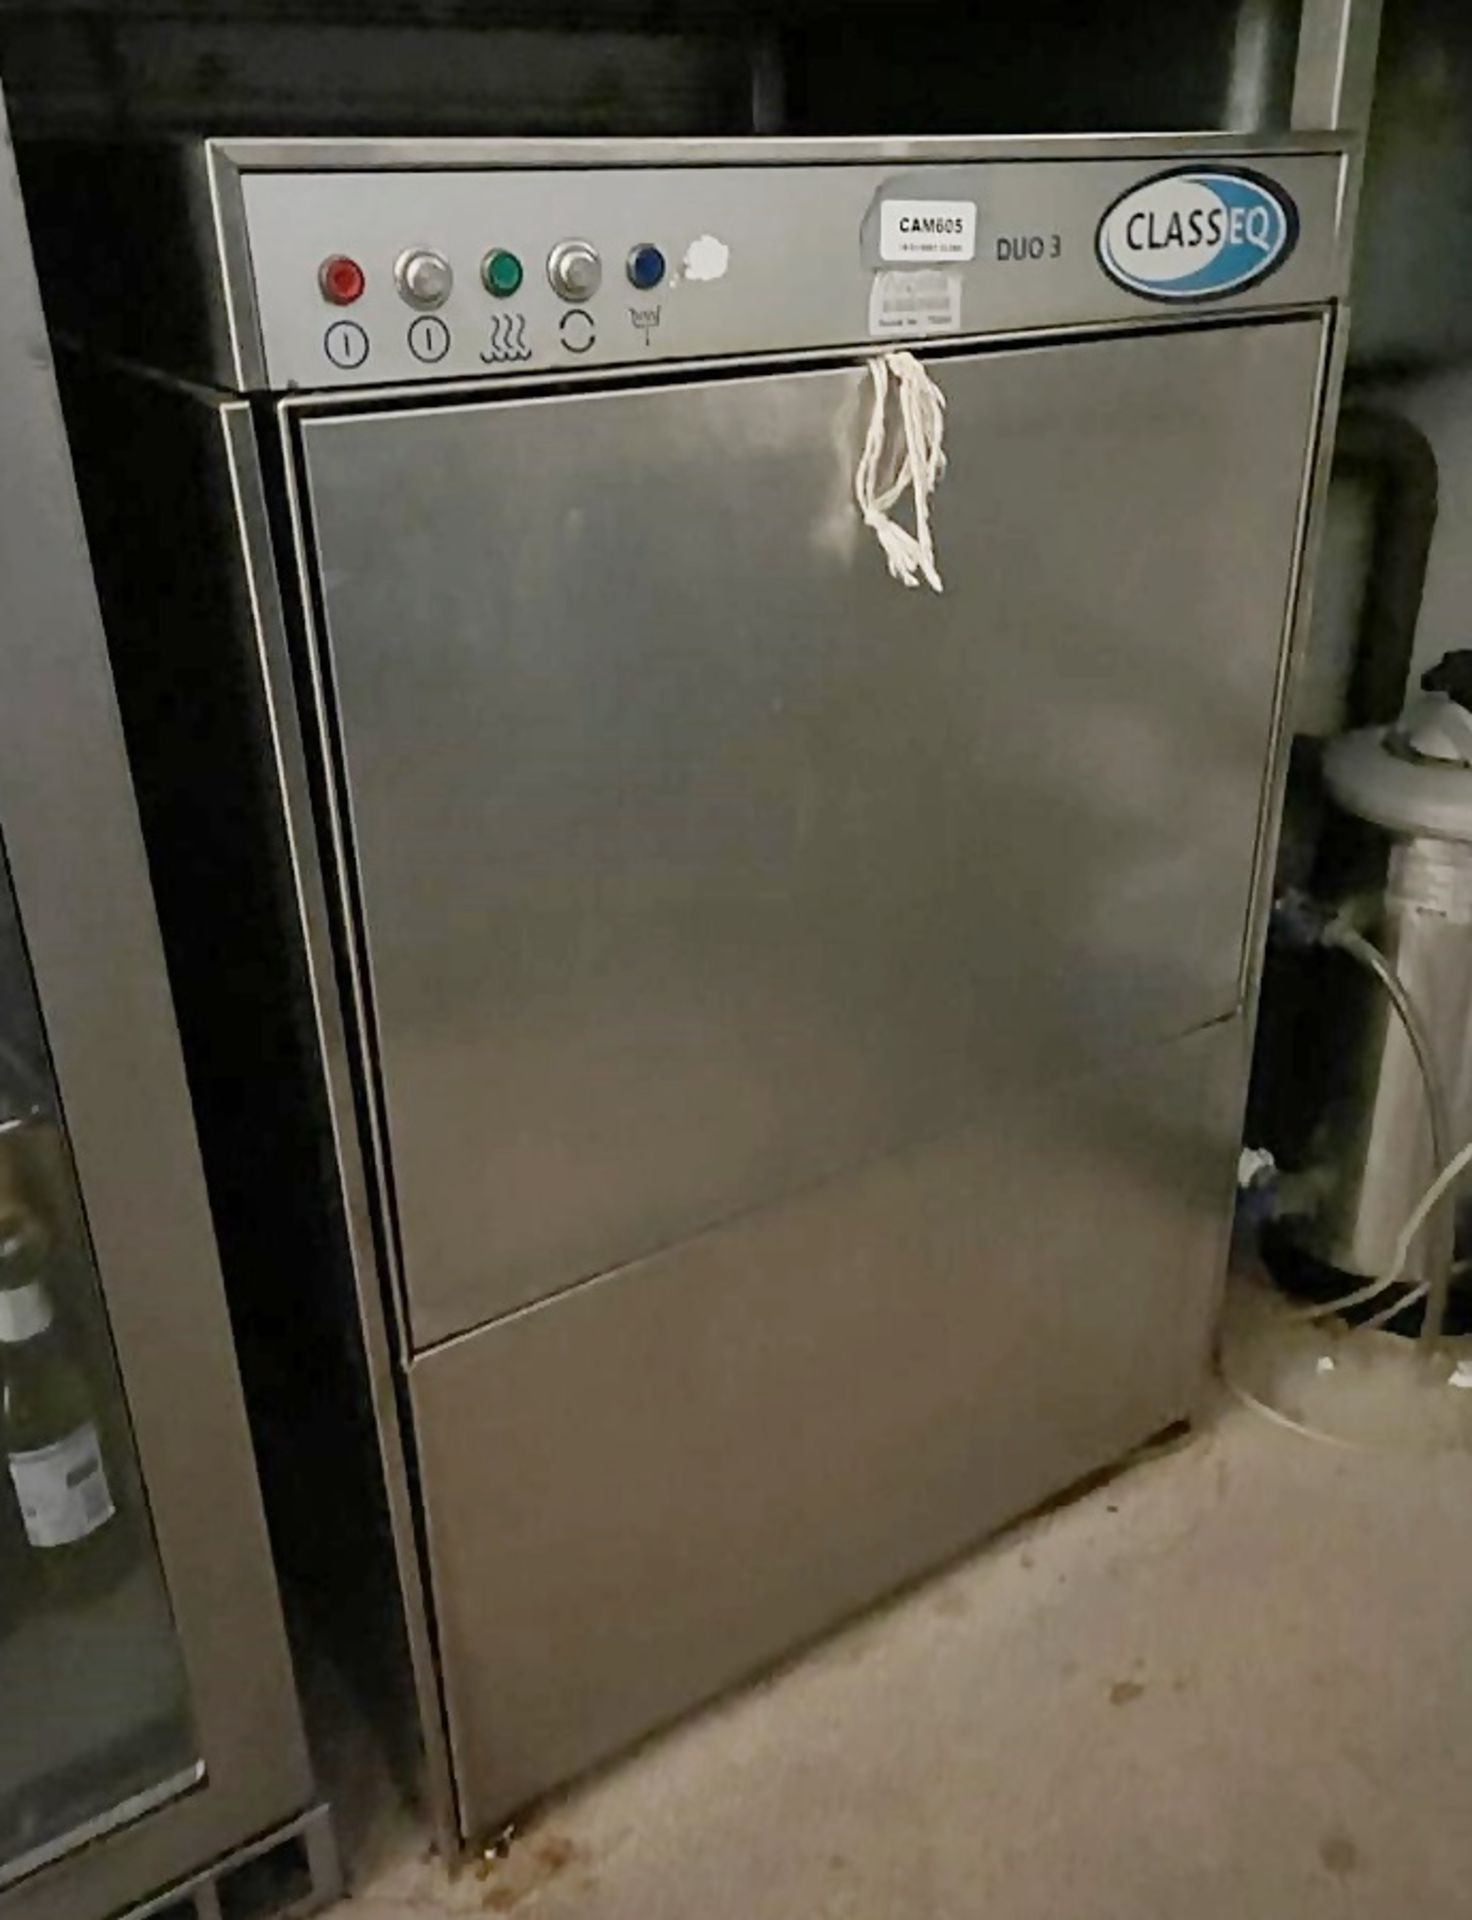 1 x CLASS EQ DUO3 Commercial Cup Washer - Ref: CAM605 - CL612 - Location: London SW1PThis item is to